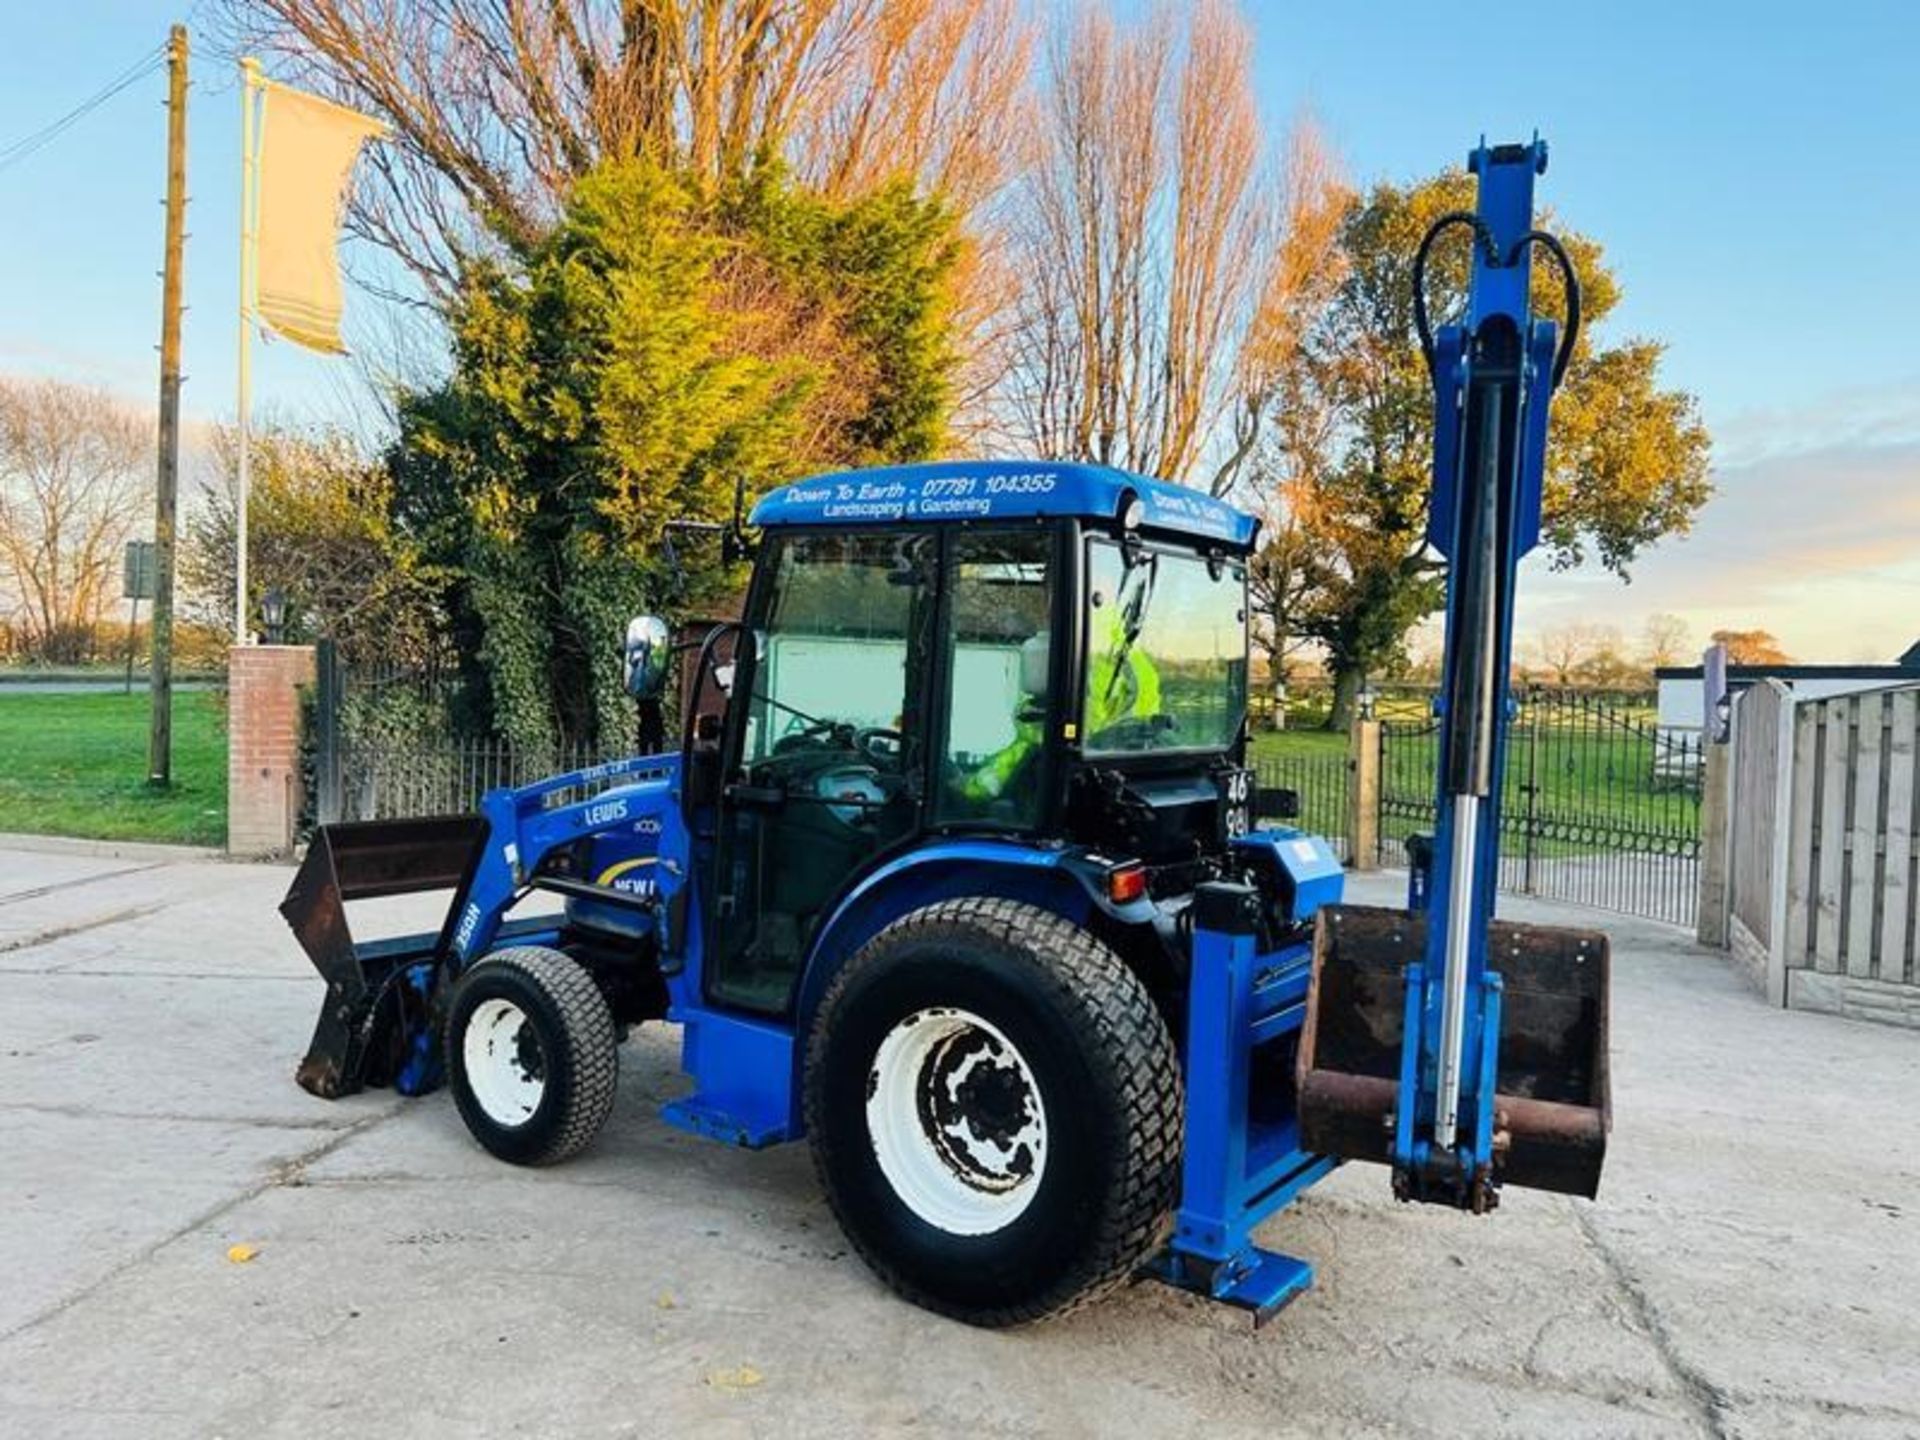 NEW HOLLAND BOOMER 40 4WD TRACTOR *YEAR 2014, ONLY 737 HRS* C/W LOADER & BACK TRACTOR - Image 19 of 19